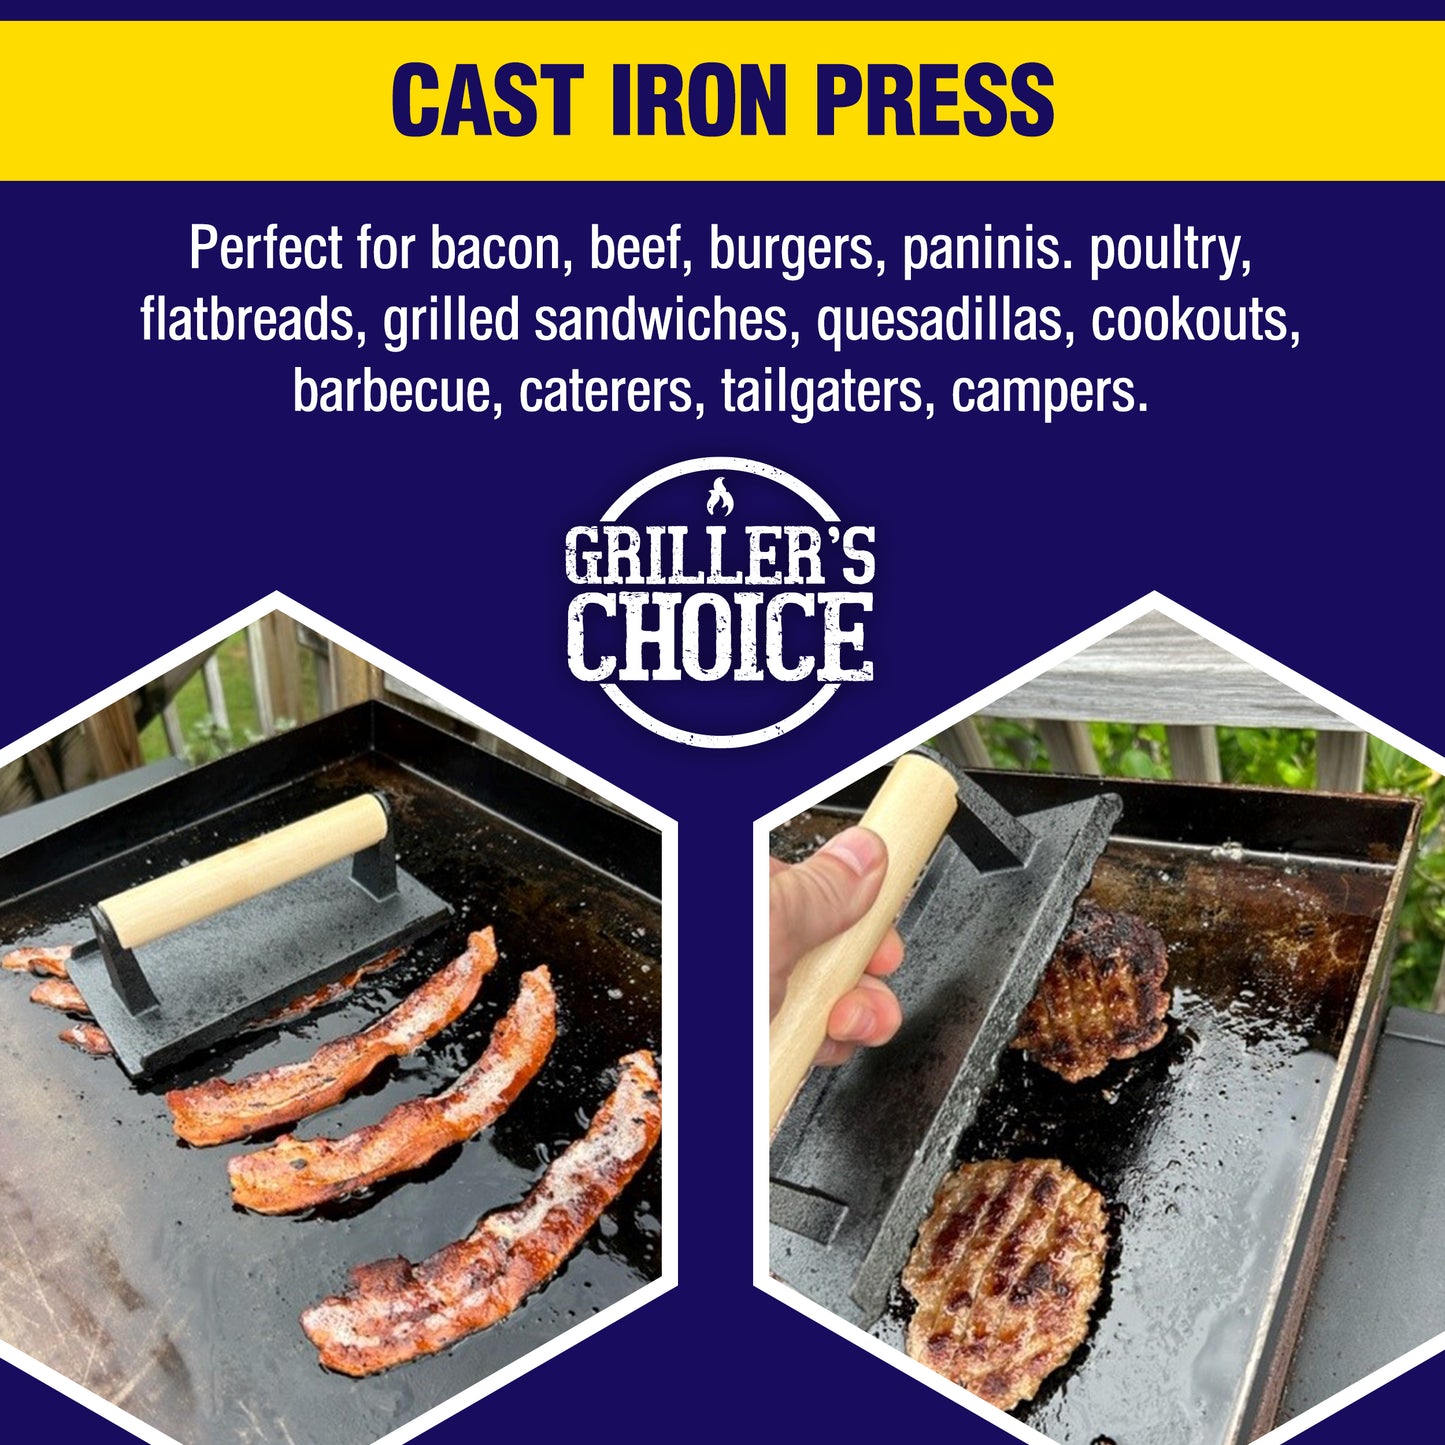 Grillers Choice Bacon Press and Grill Press 2 Piece Set - Durable Cast Iron Meat Press, Hamburger Smasher, Perfect for Grilling and Griddle Cooking, Ideal for Chefs and Cooks